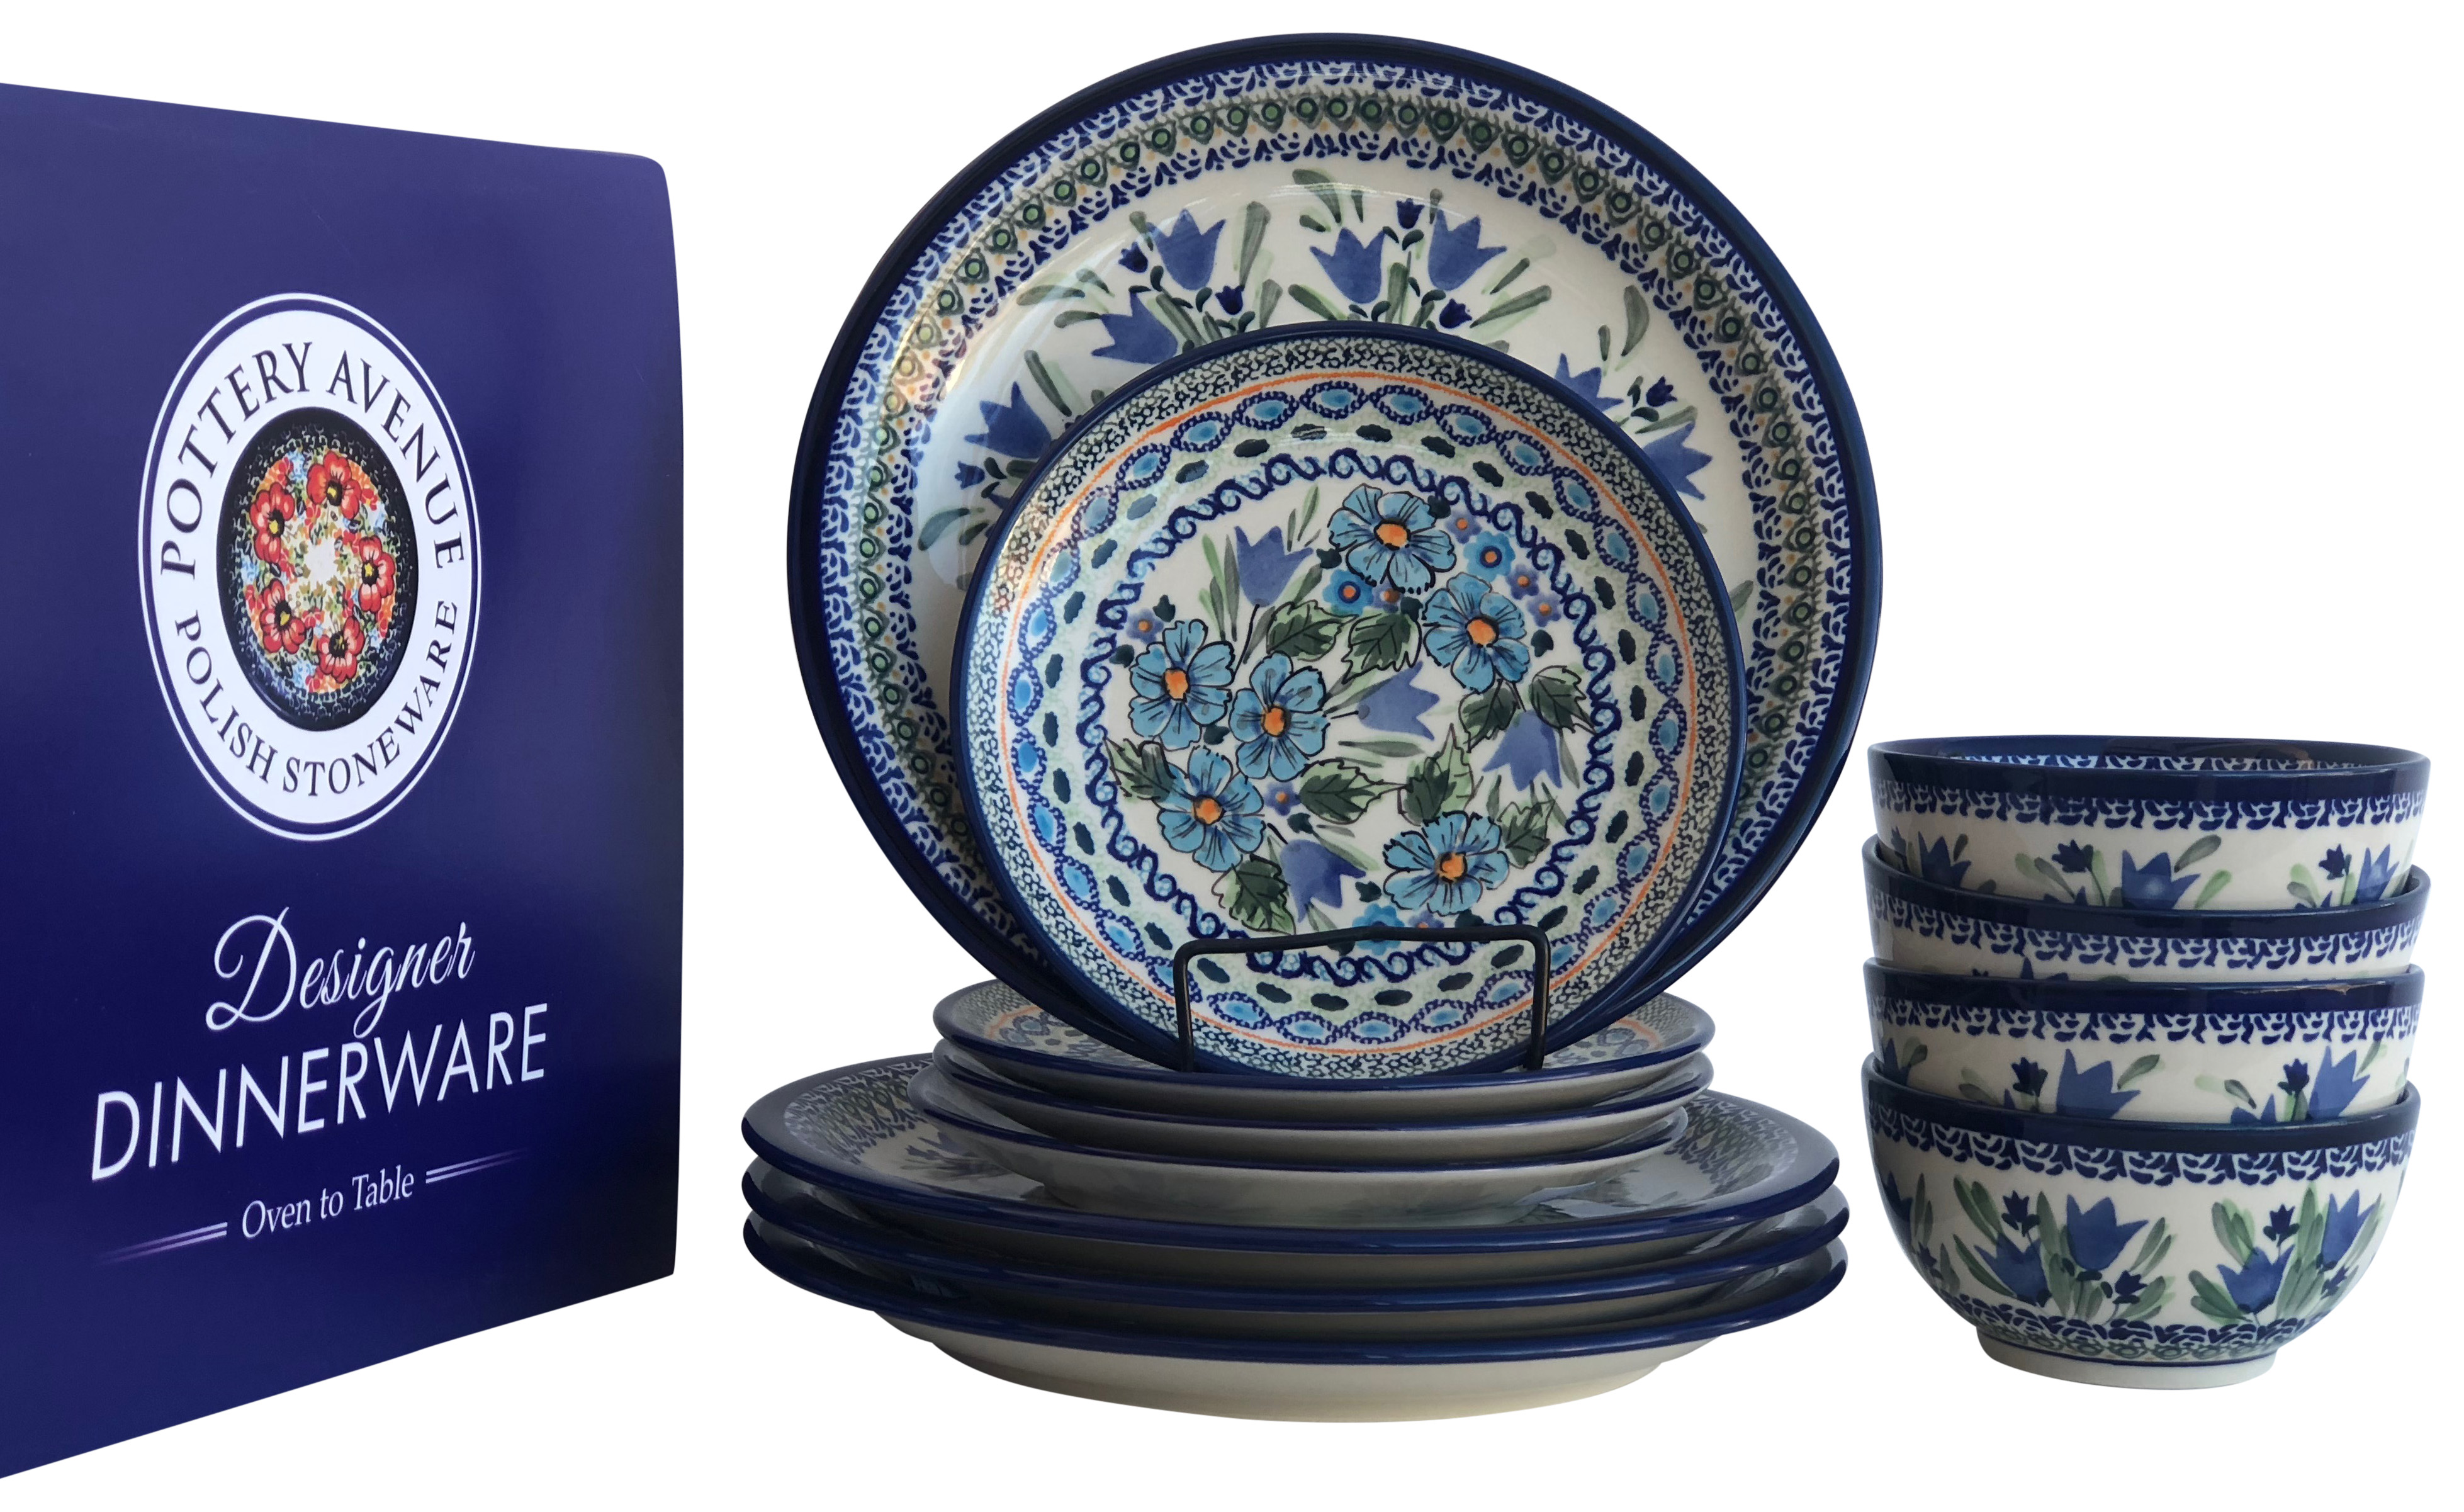 Pottery Avenue Launches Designer Dinnerware for 2020 Holiday Season